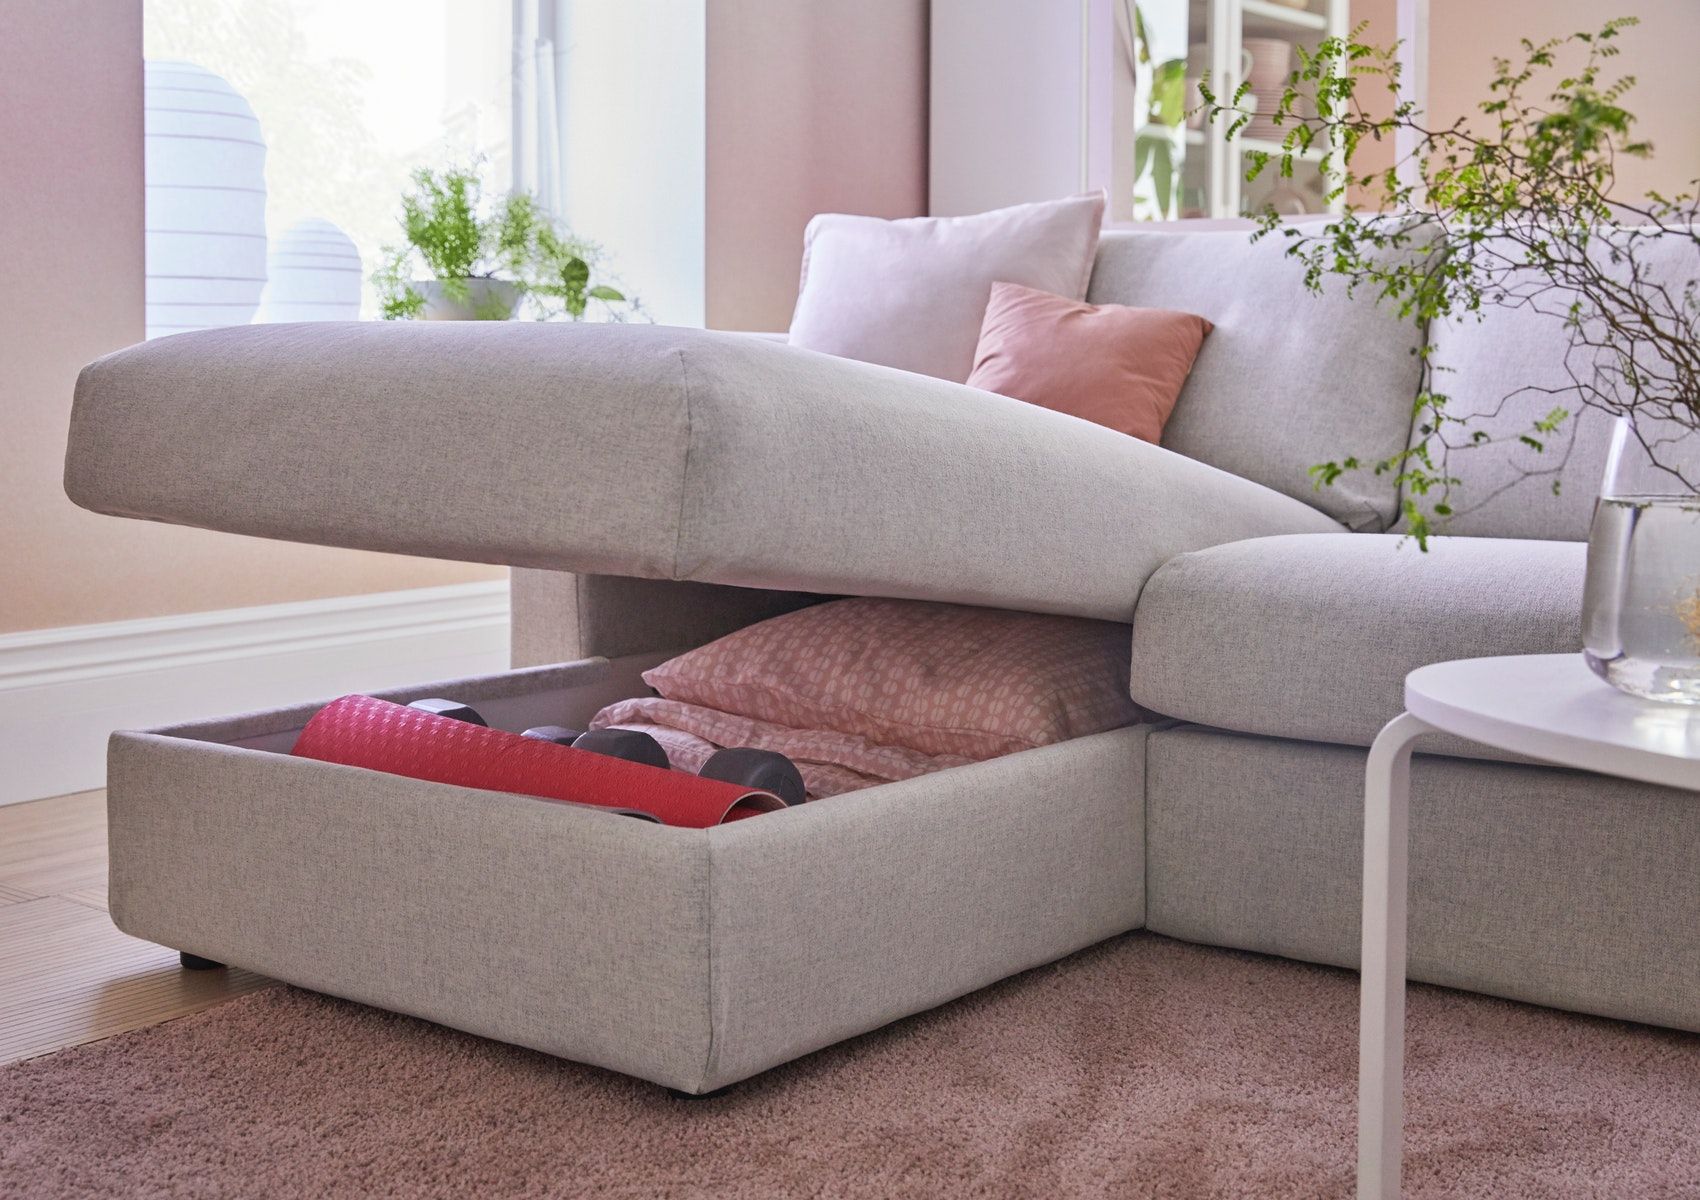 The 7 Best Sofas To Bring Comfort In A Compact Living Room – Ikea Indonesia Inside Sofas For Compact Living (Gallery 3 of 20)